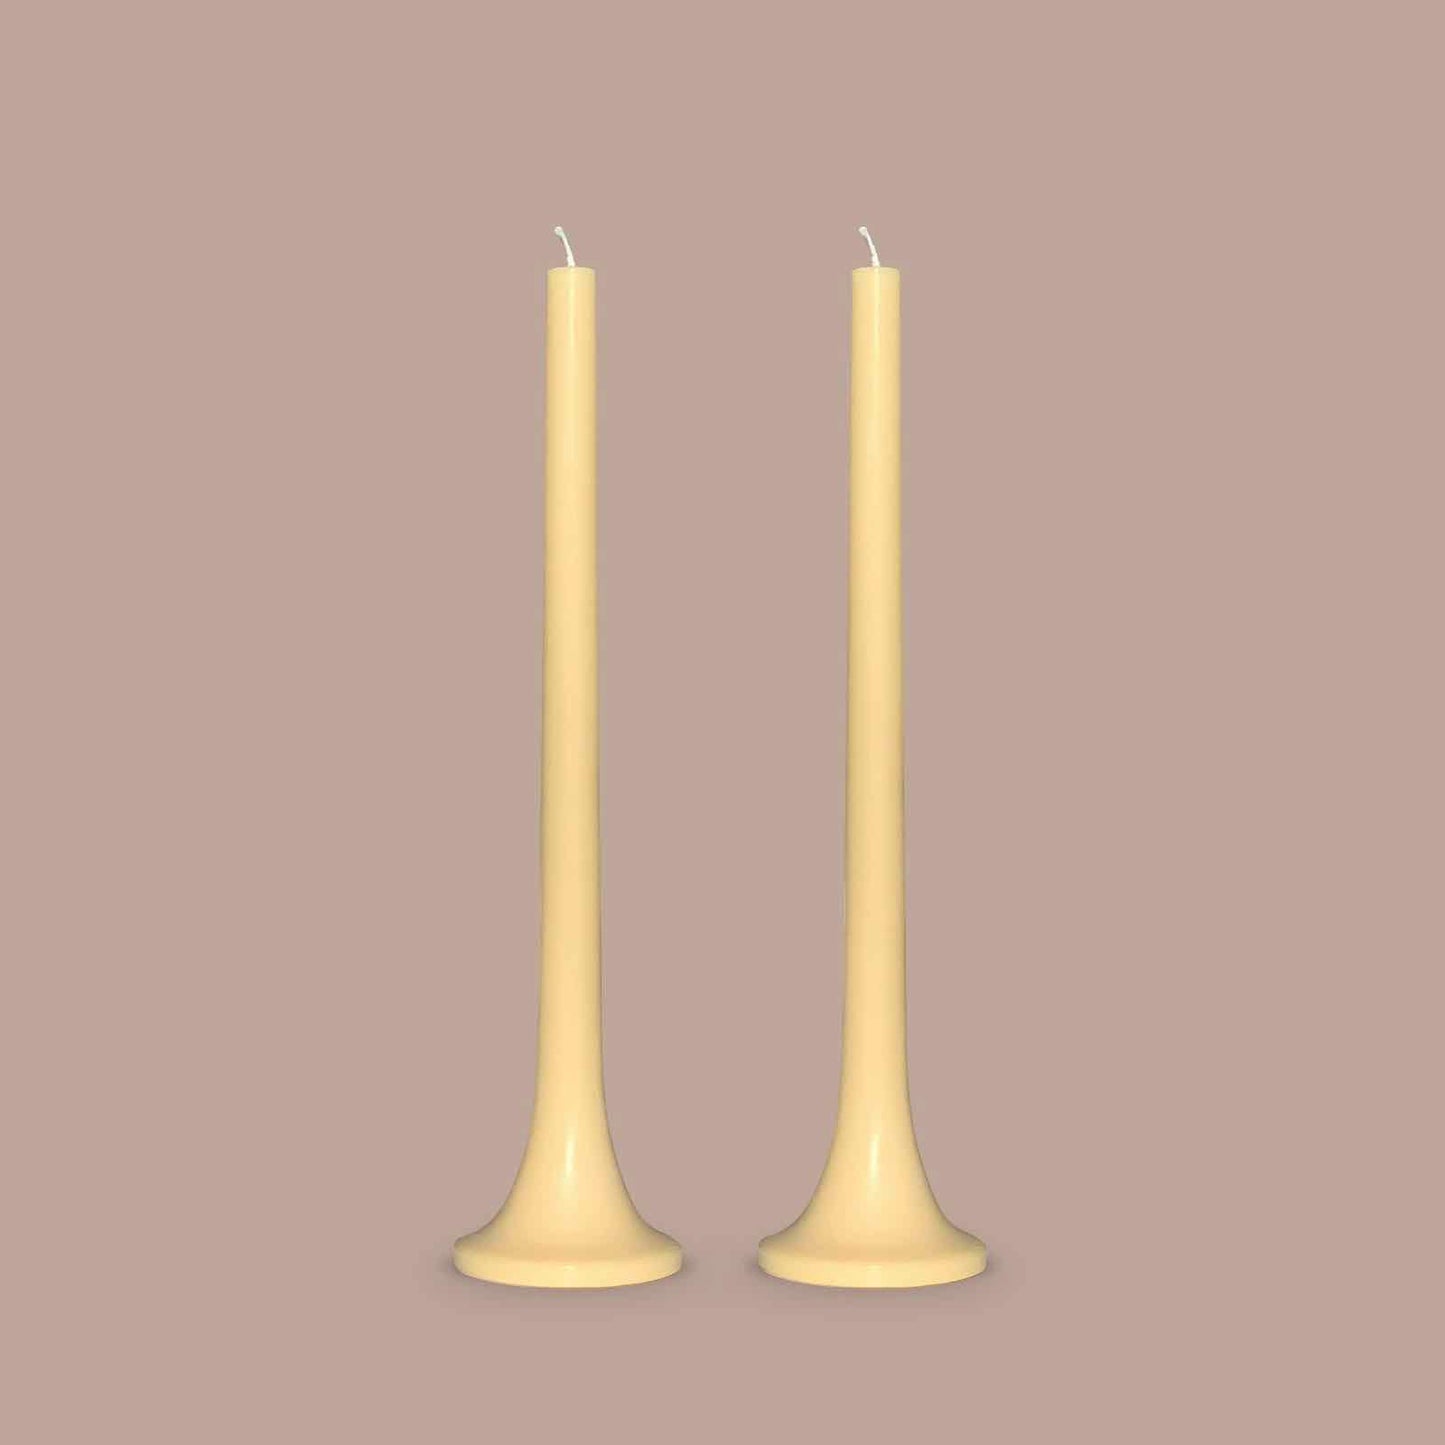 Pale yellow dinner candles